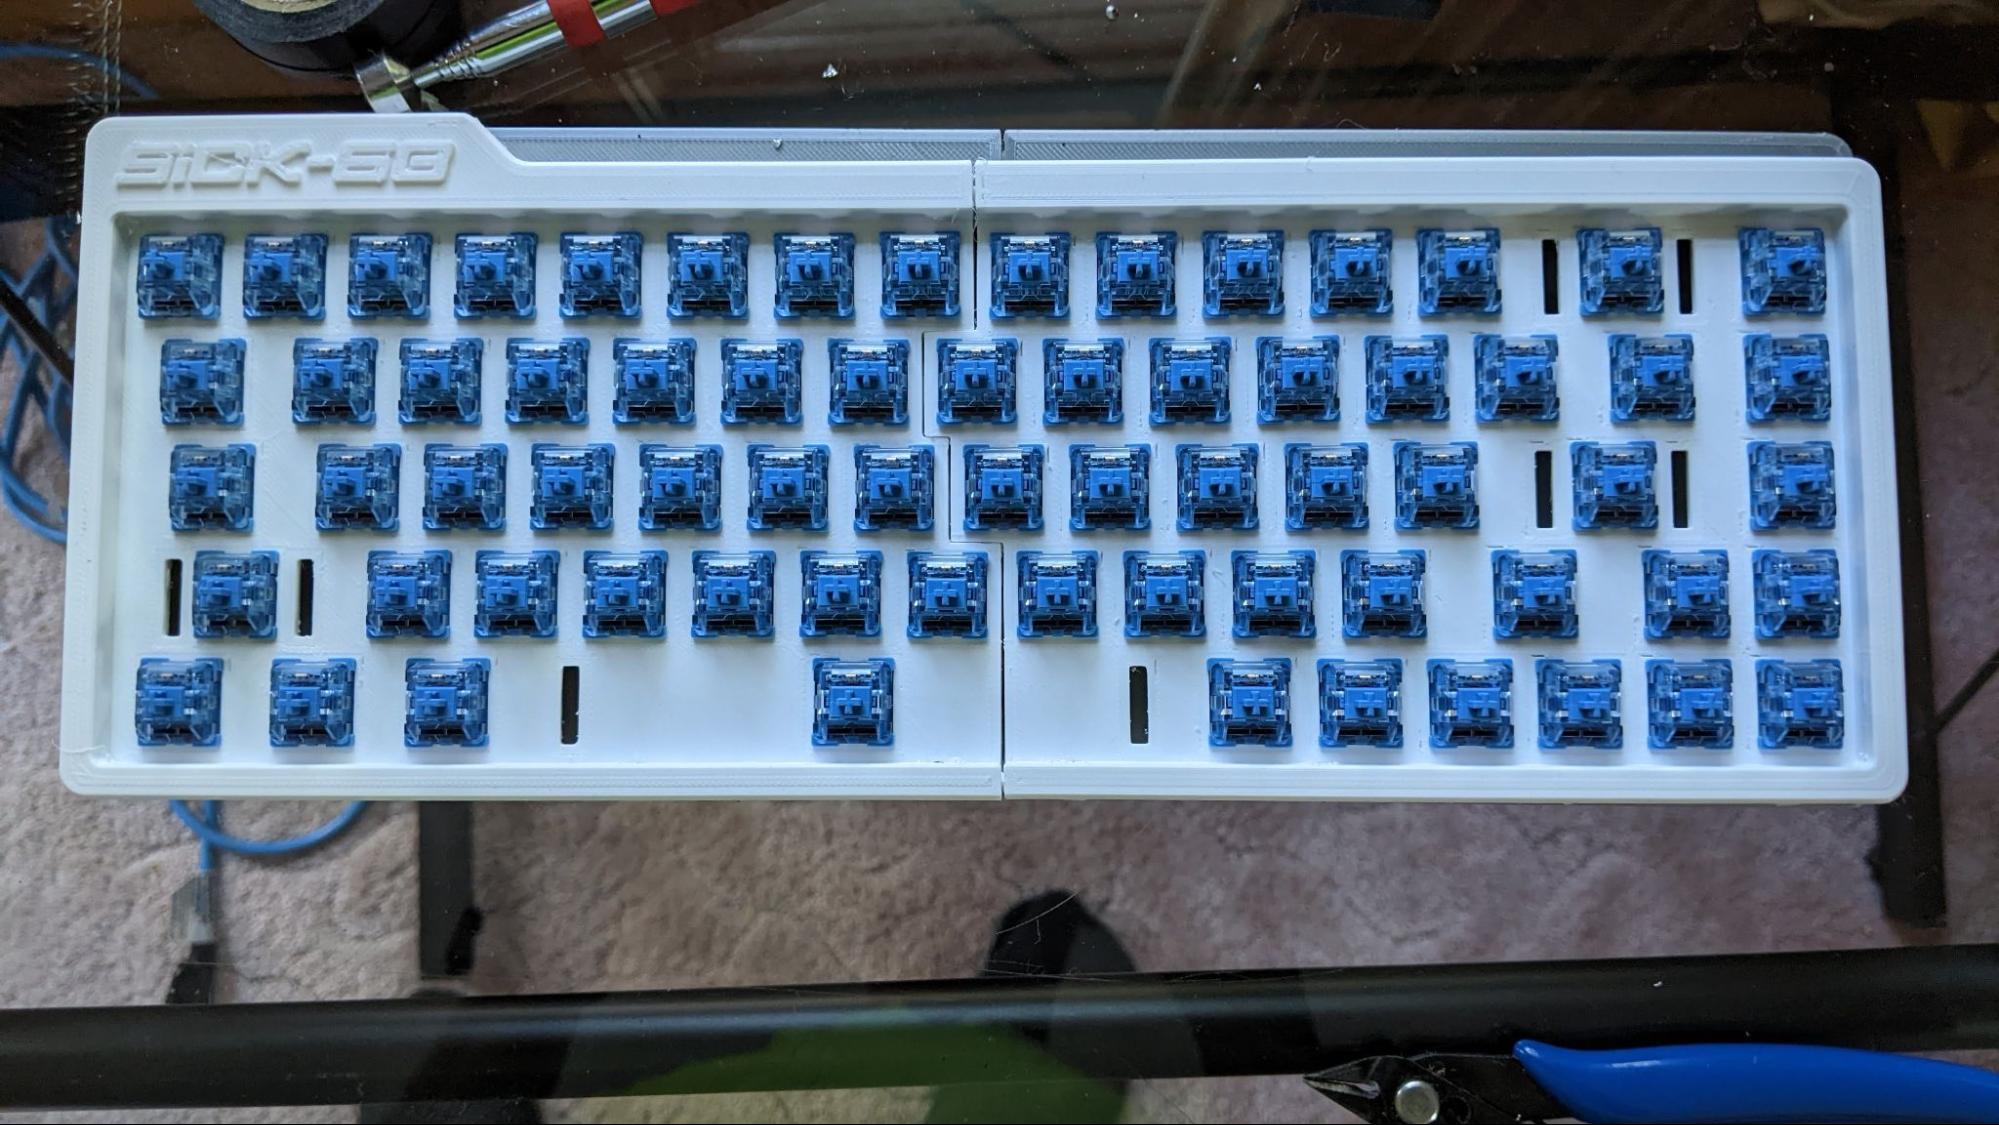 Build a mechanical keyboard from scratch with 3D-printed components